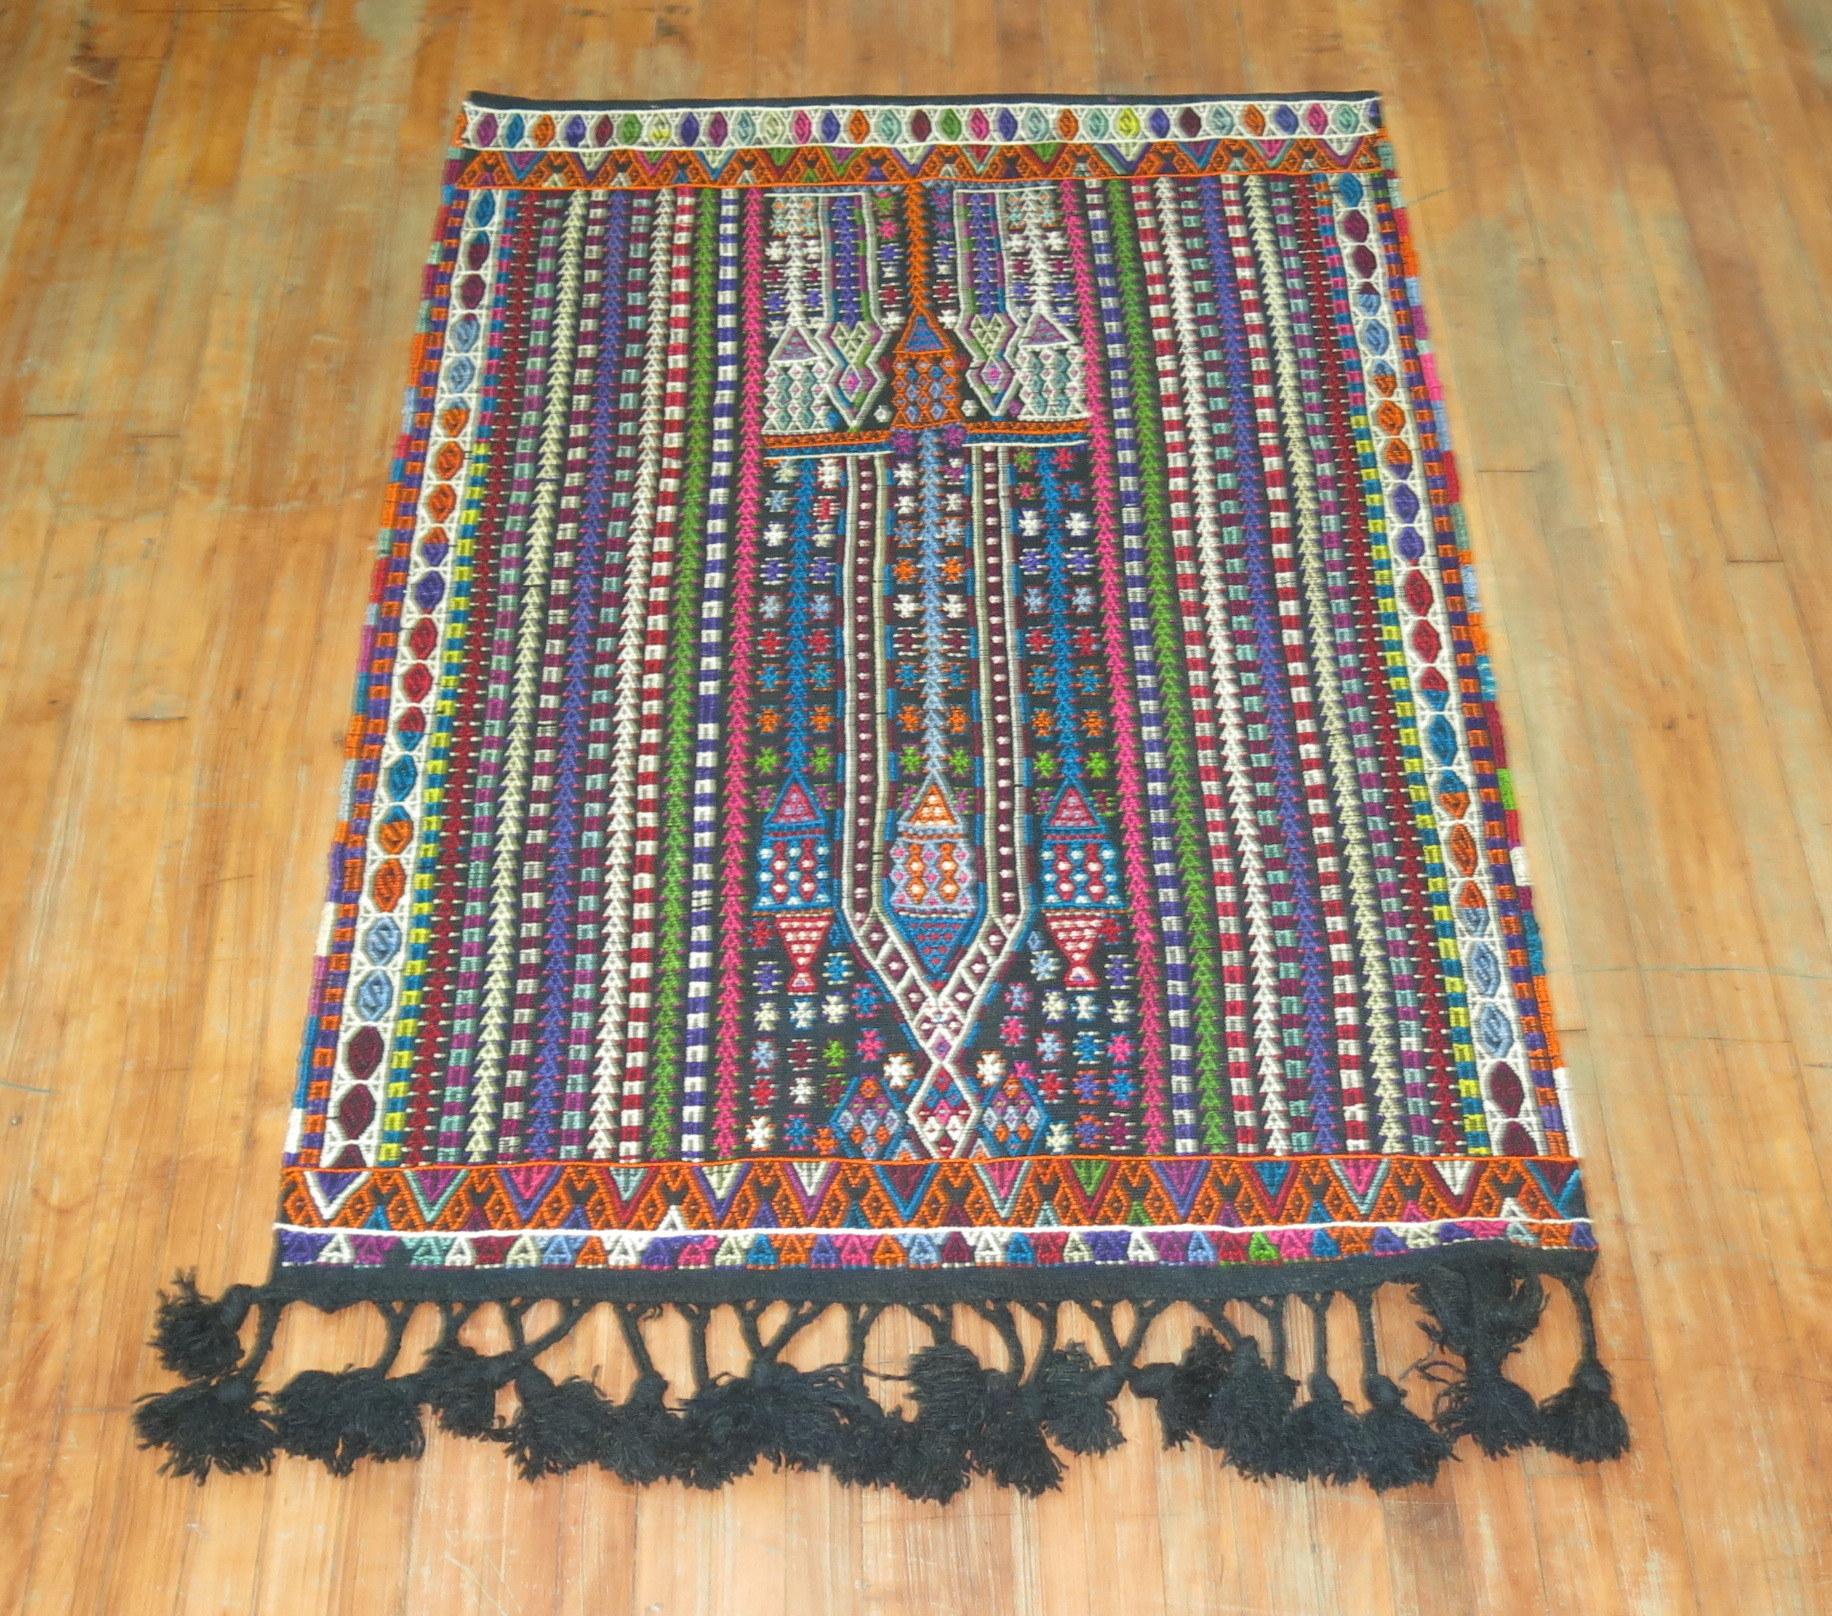 Colorful midcentury Turkish Jajim also known as Jijim.

Measures: 3'7” x 4'11”

With the Jijim weaving technique, different colored threads are applied between the weft and warp threads, on the reverse of the weave. It is often used to decorate